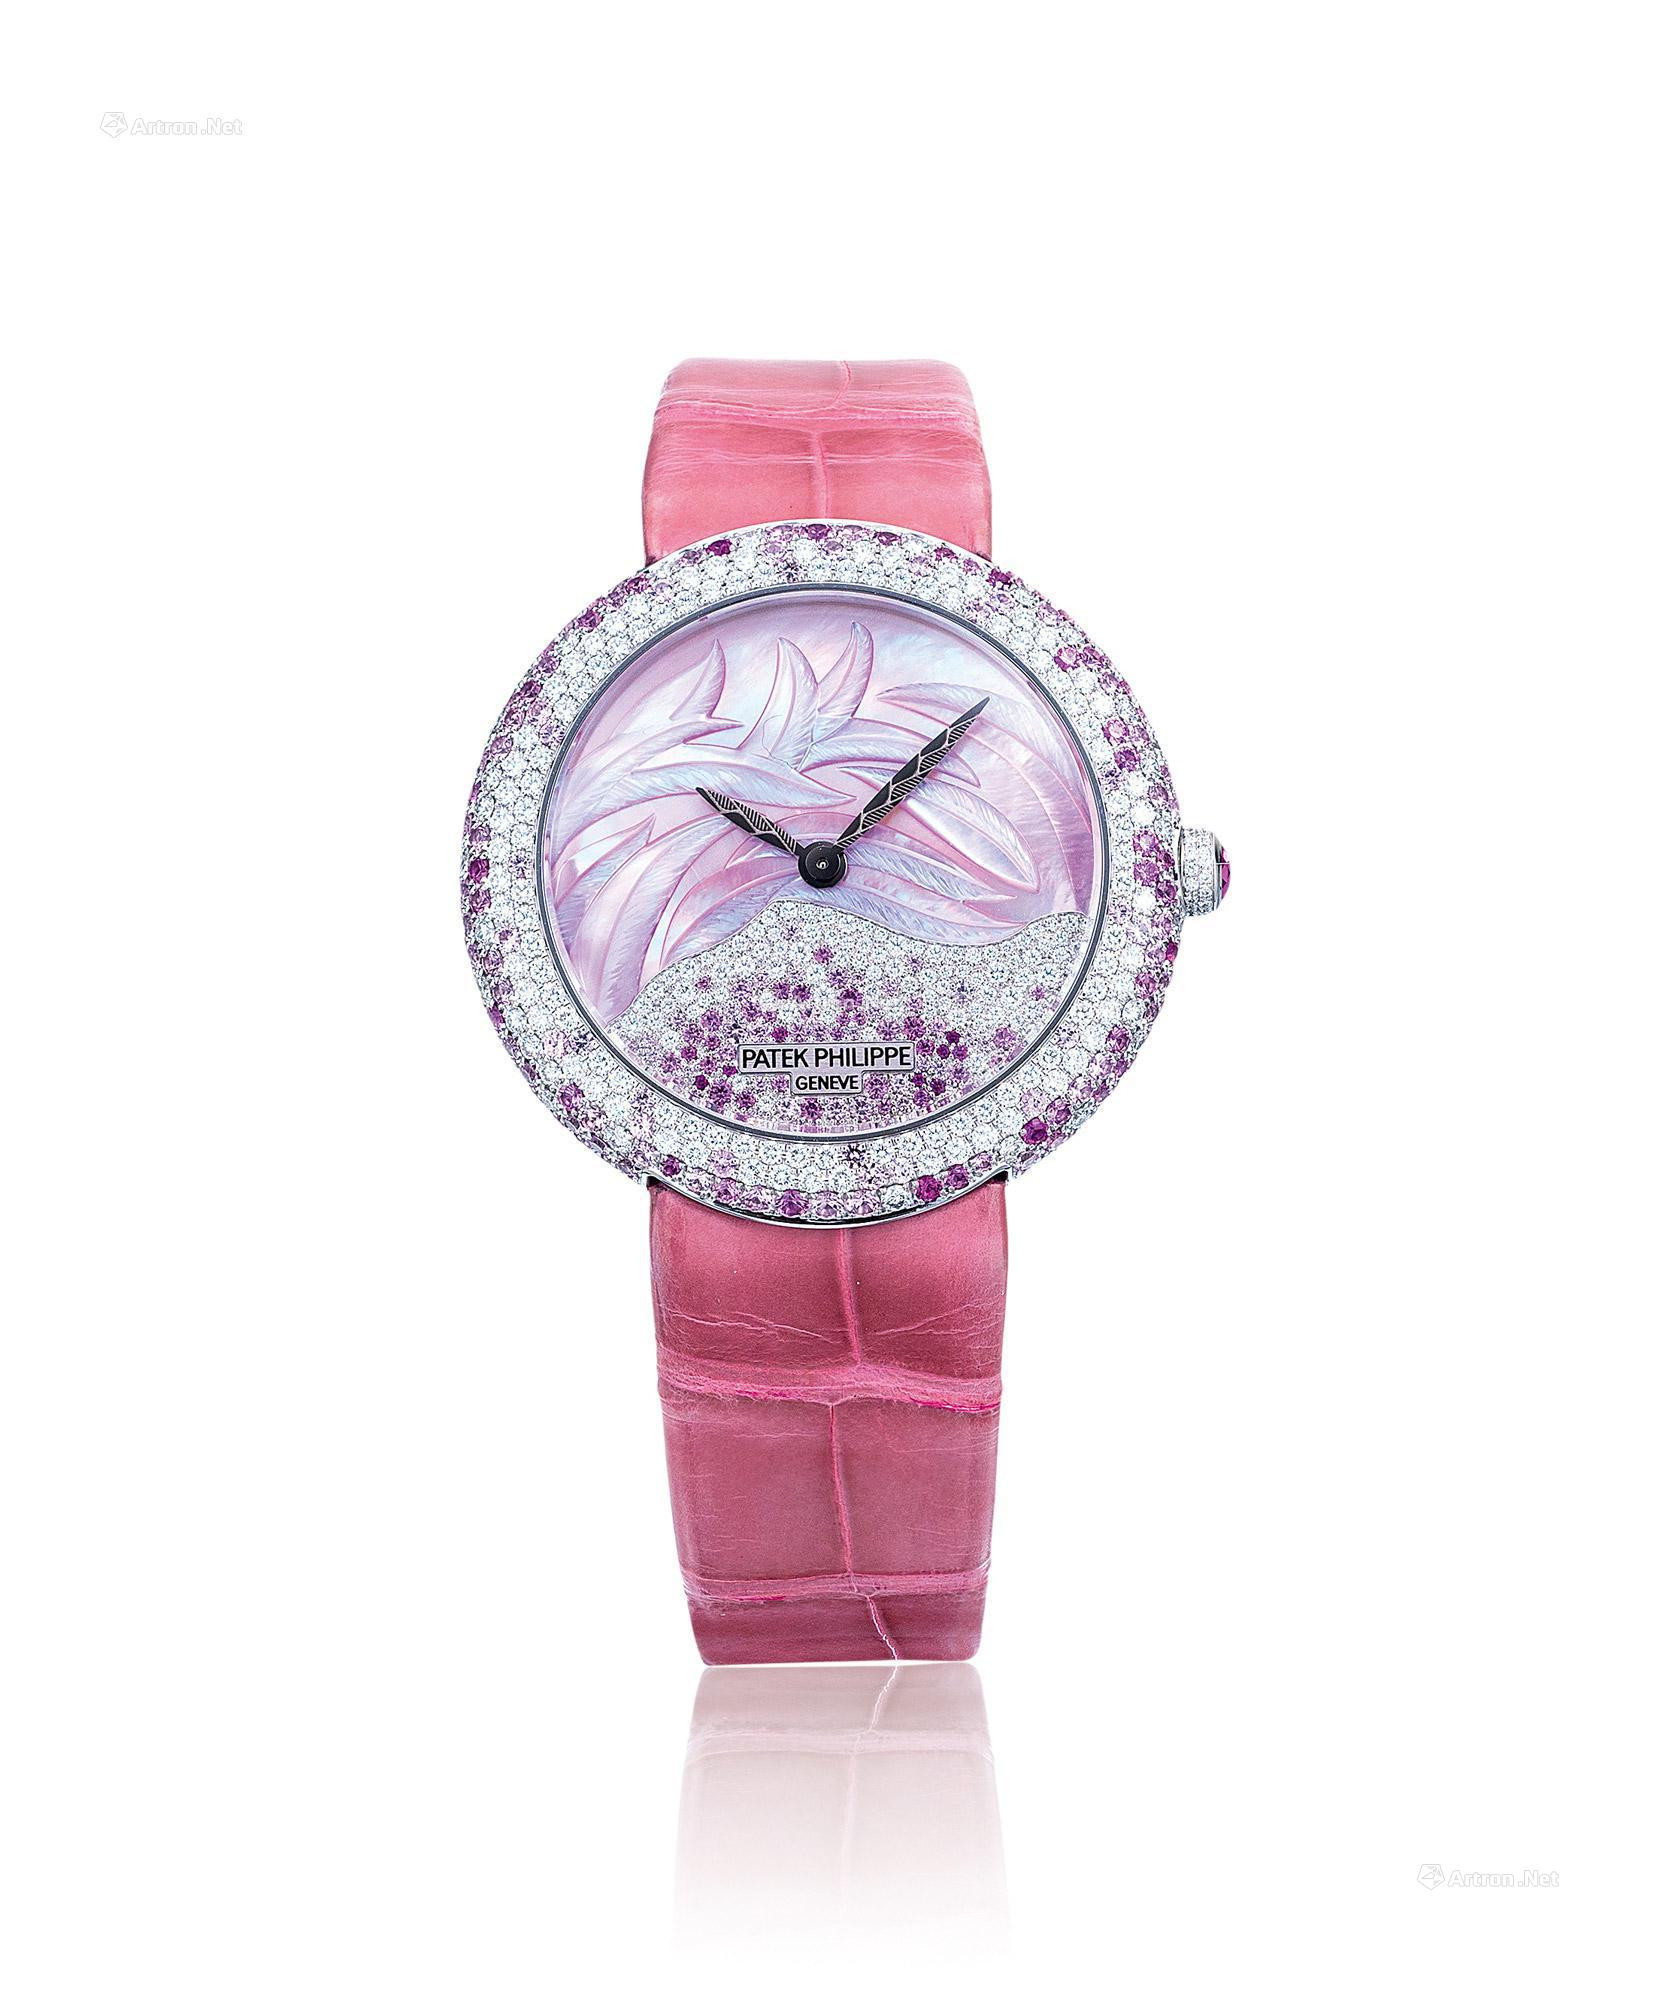 PATEK PHILIPPE  AN ELEGANT AND FINE LADY’S WHITE GOLD， DIAMOND AND PINK-SAPPHIRE SET AUTOMATIC WRISTWATCH， WITH CERTIFICATE OF ORIGIN AND PRESENTATION BOX